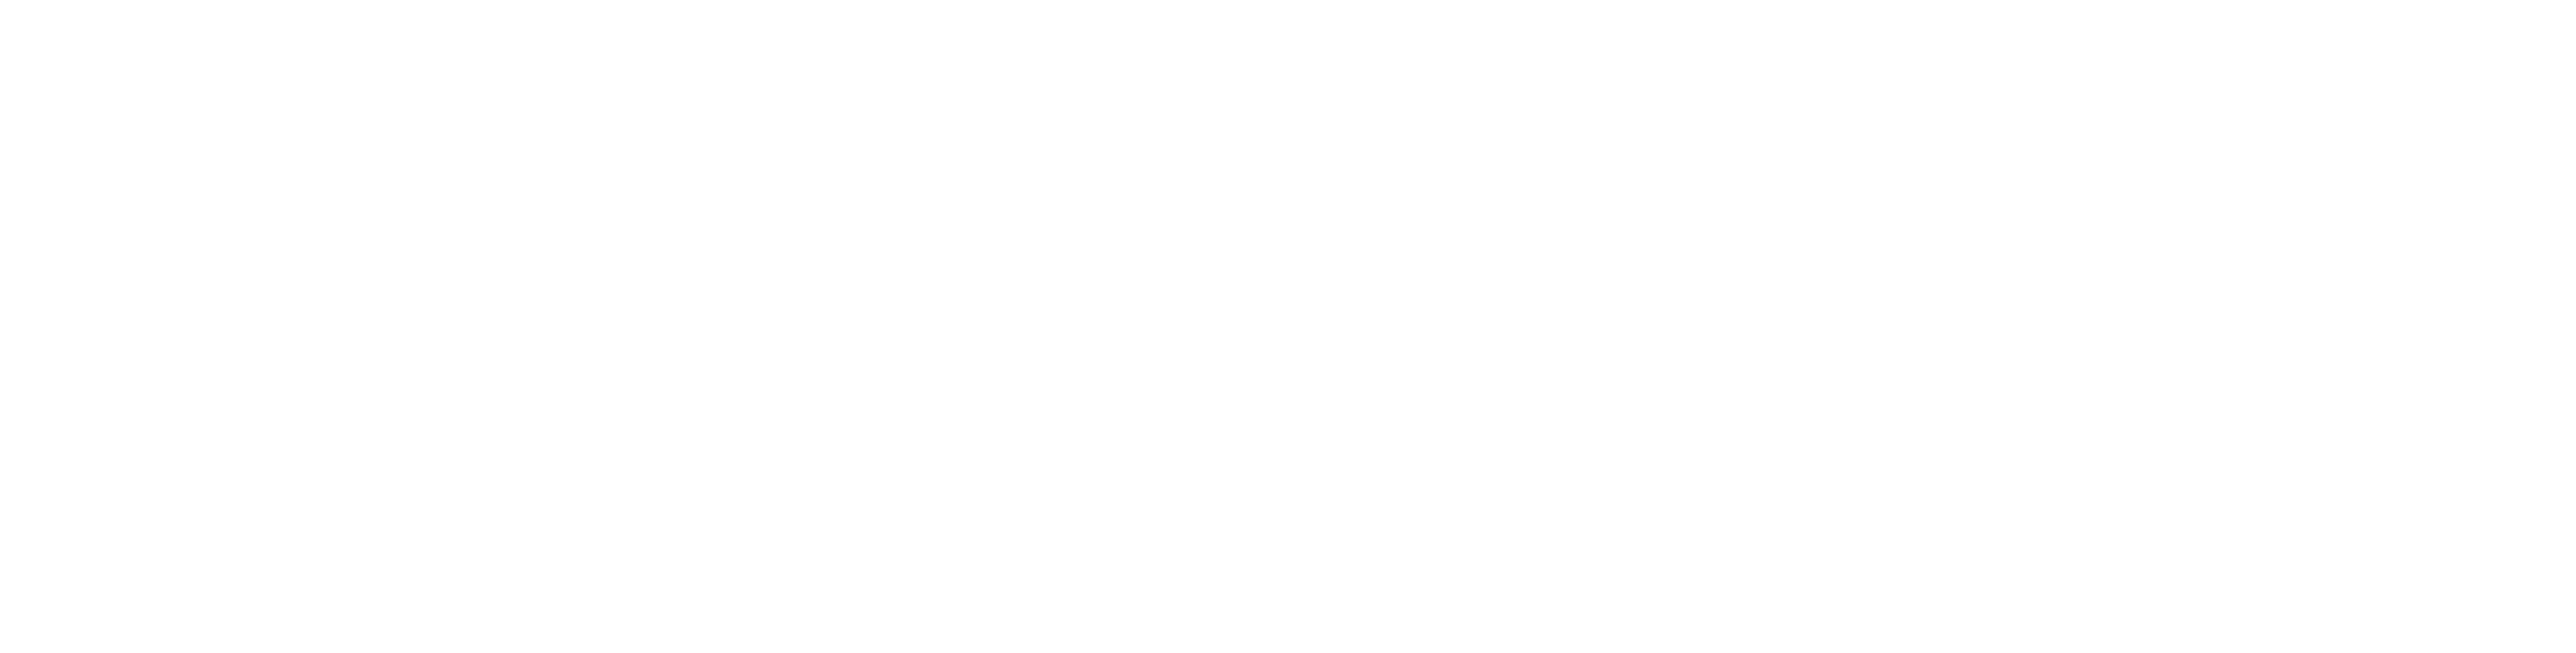 Regal Rexnord Automation Solutions Logo